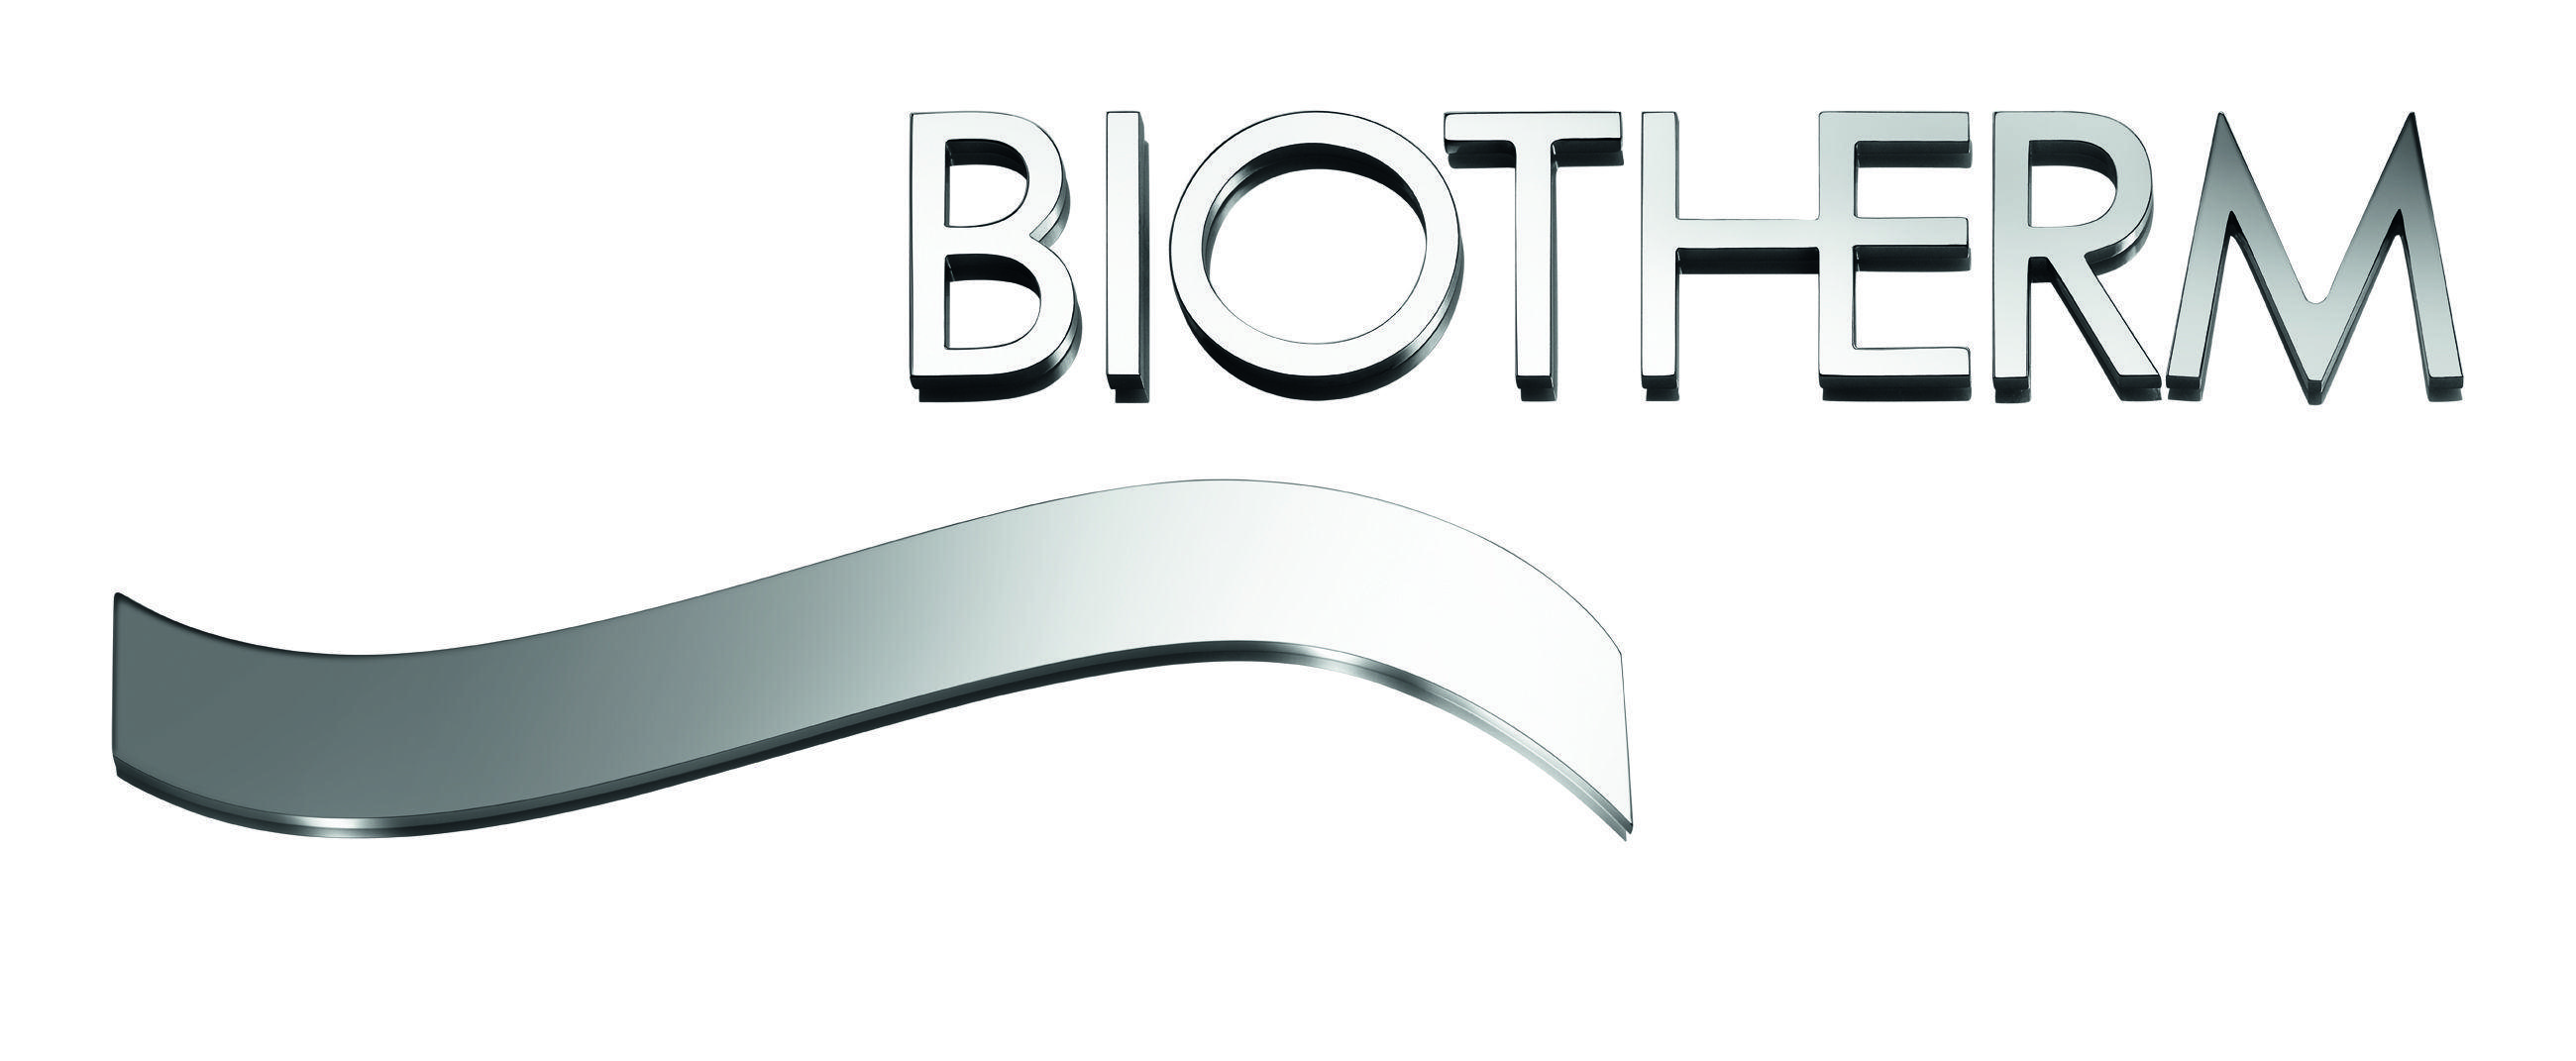 Biotherm Logo - Looking for 2 volunteers for Biotherm booth - YOUTH10 volunteer